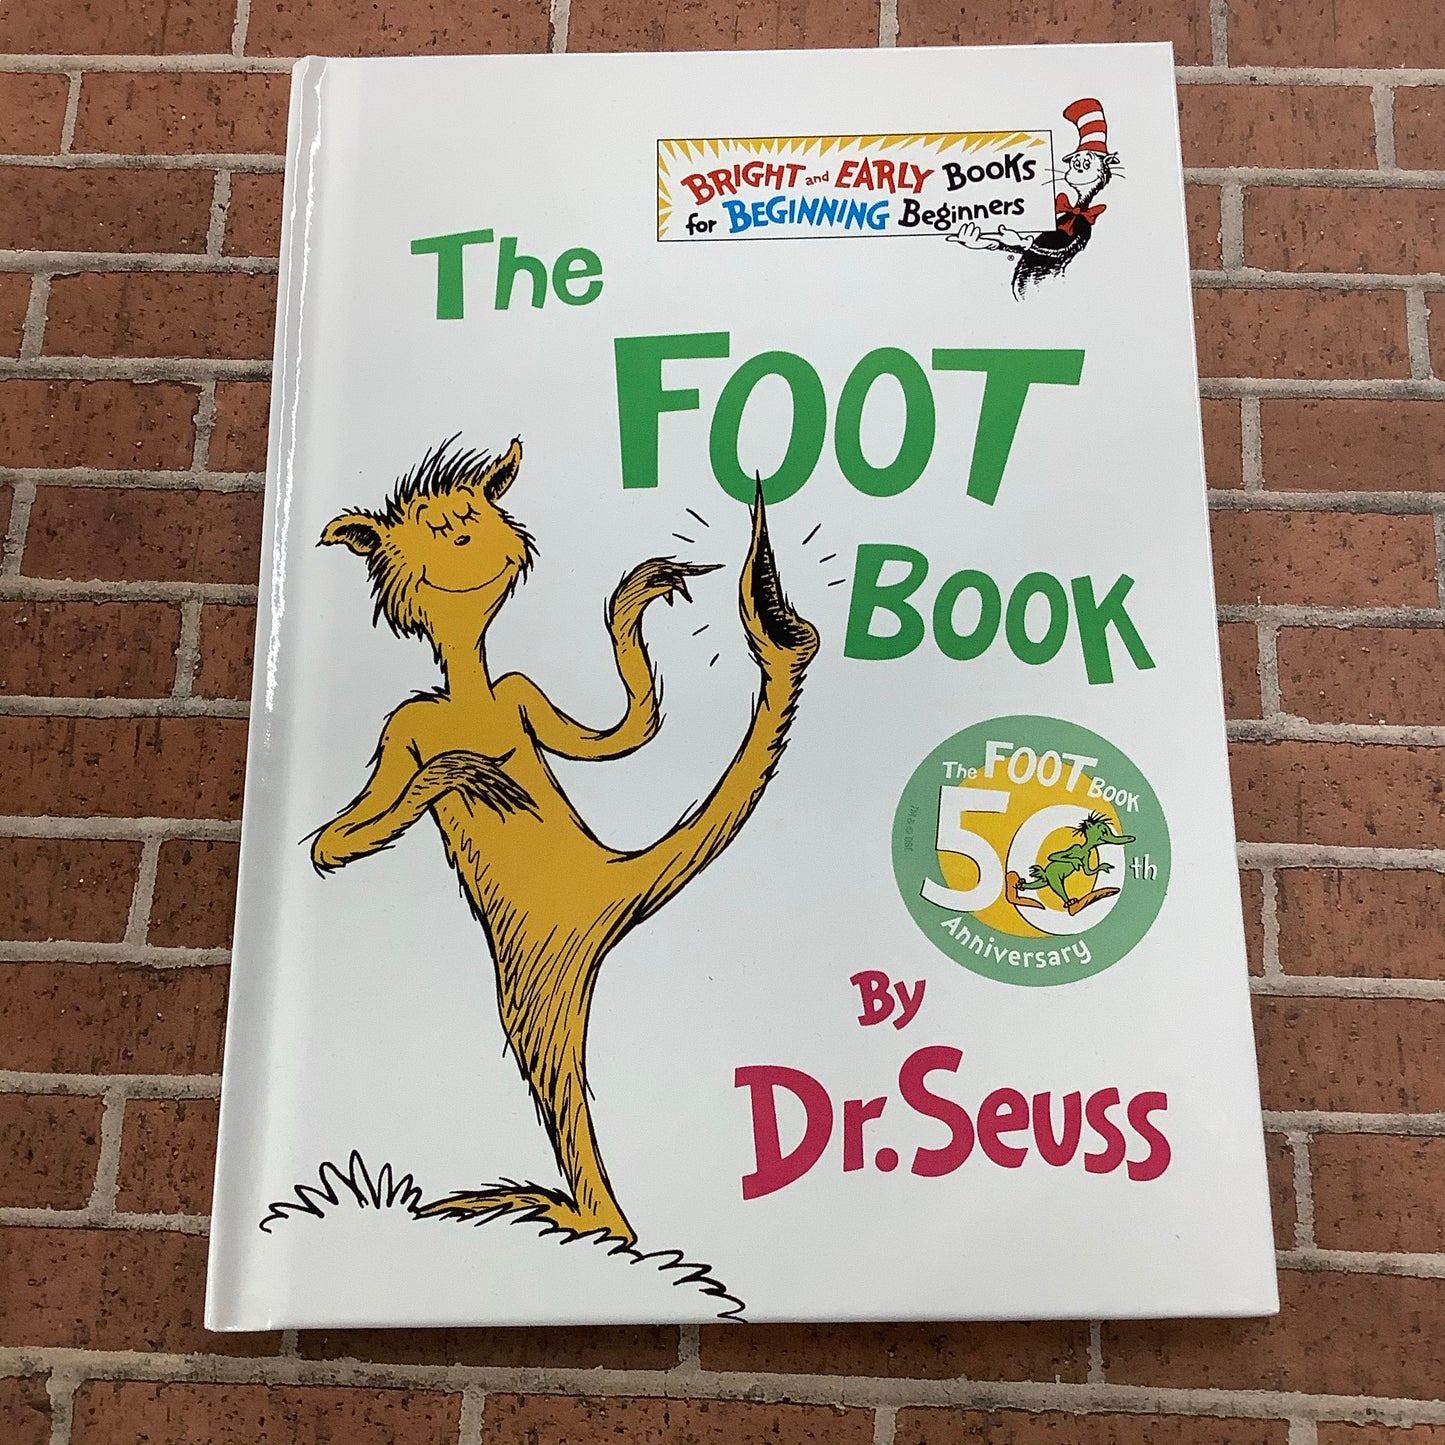 Dr. Seuss’s The Foot Book 50th Anniversary